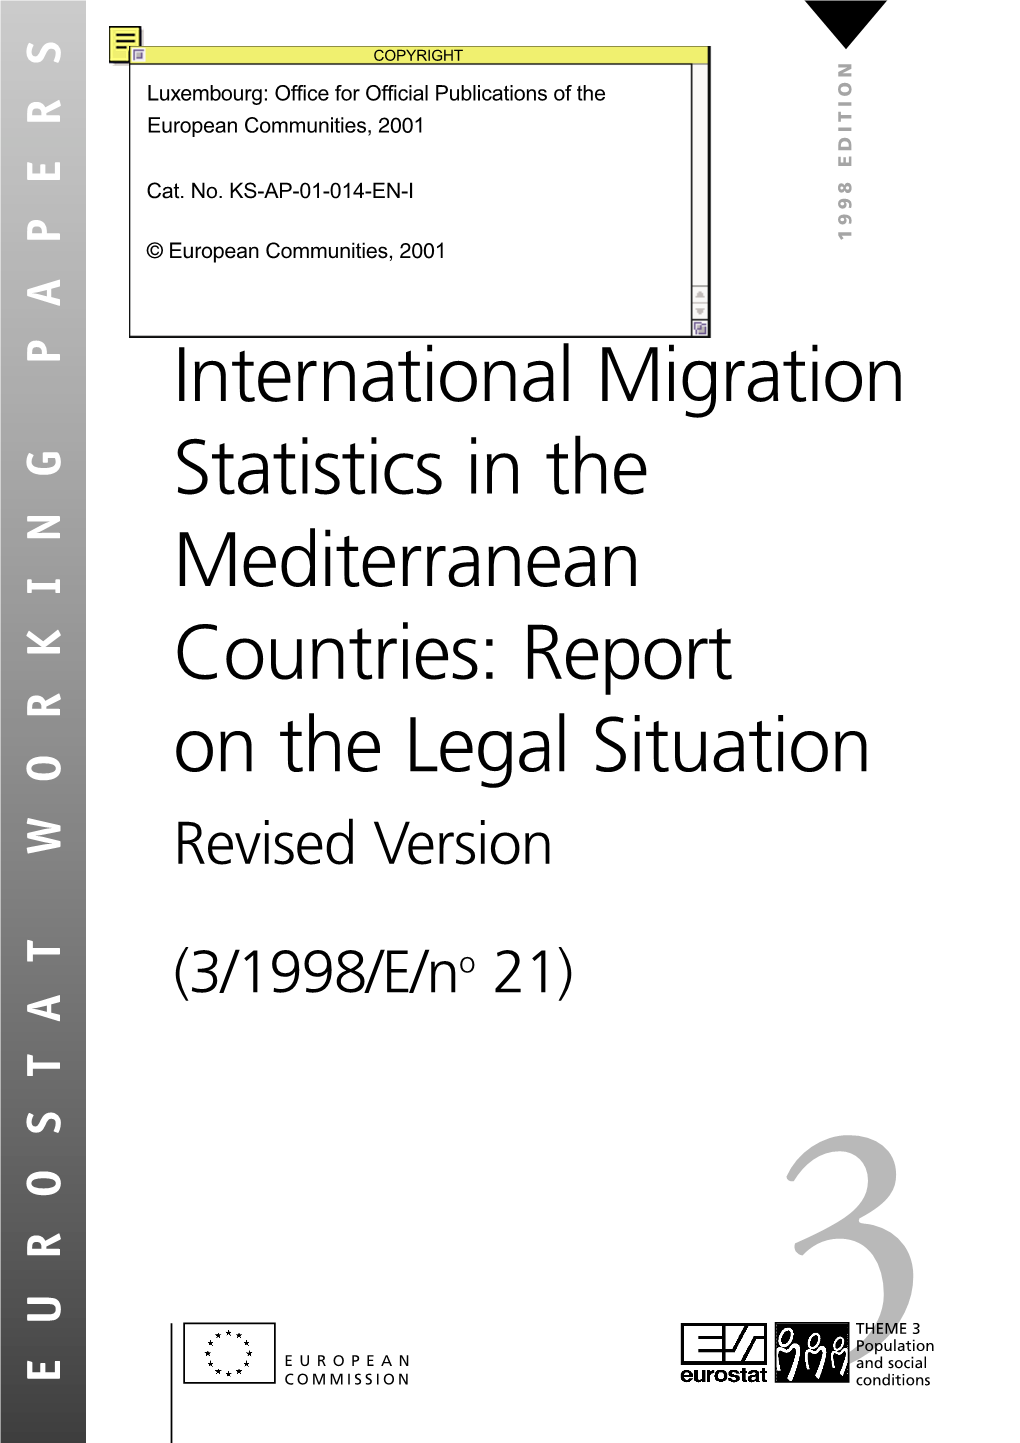 International Migration Statistics in the Mediterranean Countries: Report on the Legal Situation Revised Version